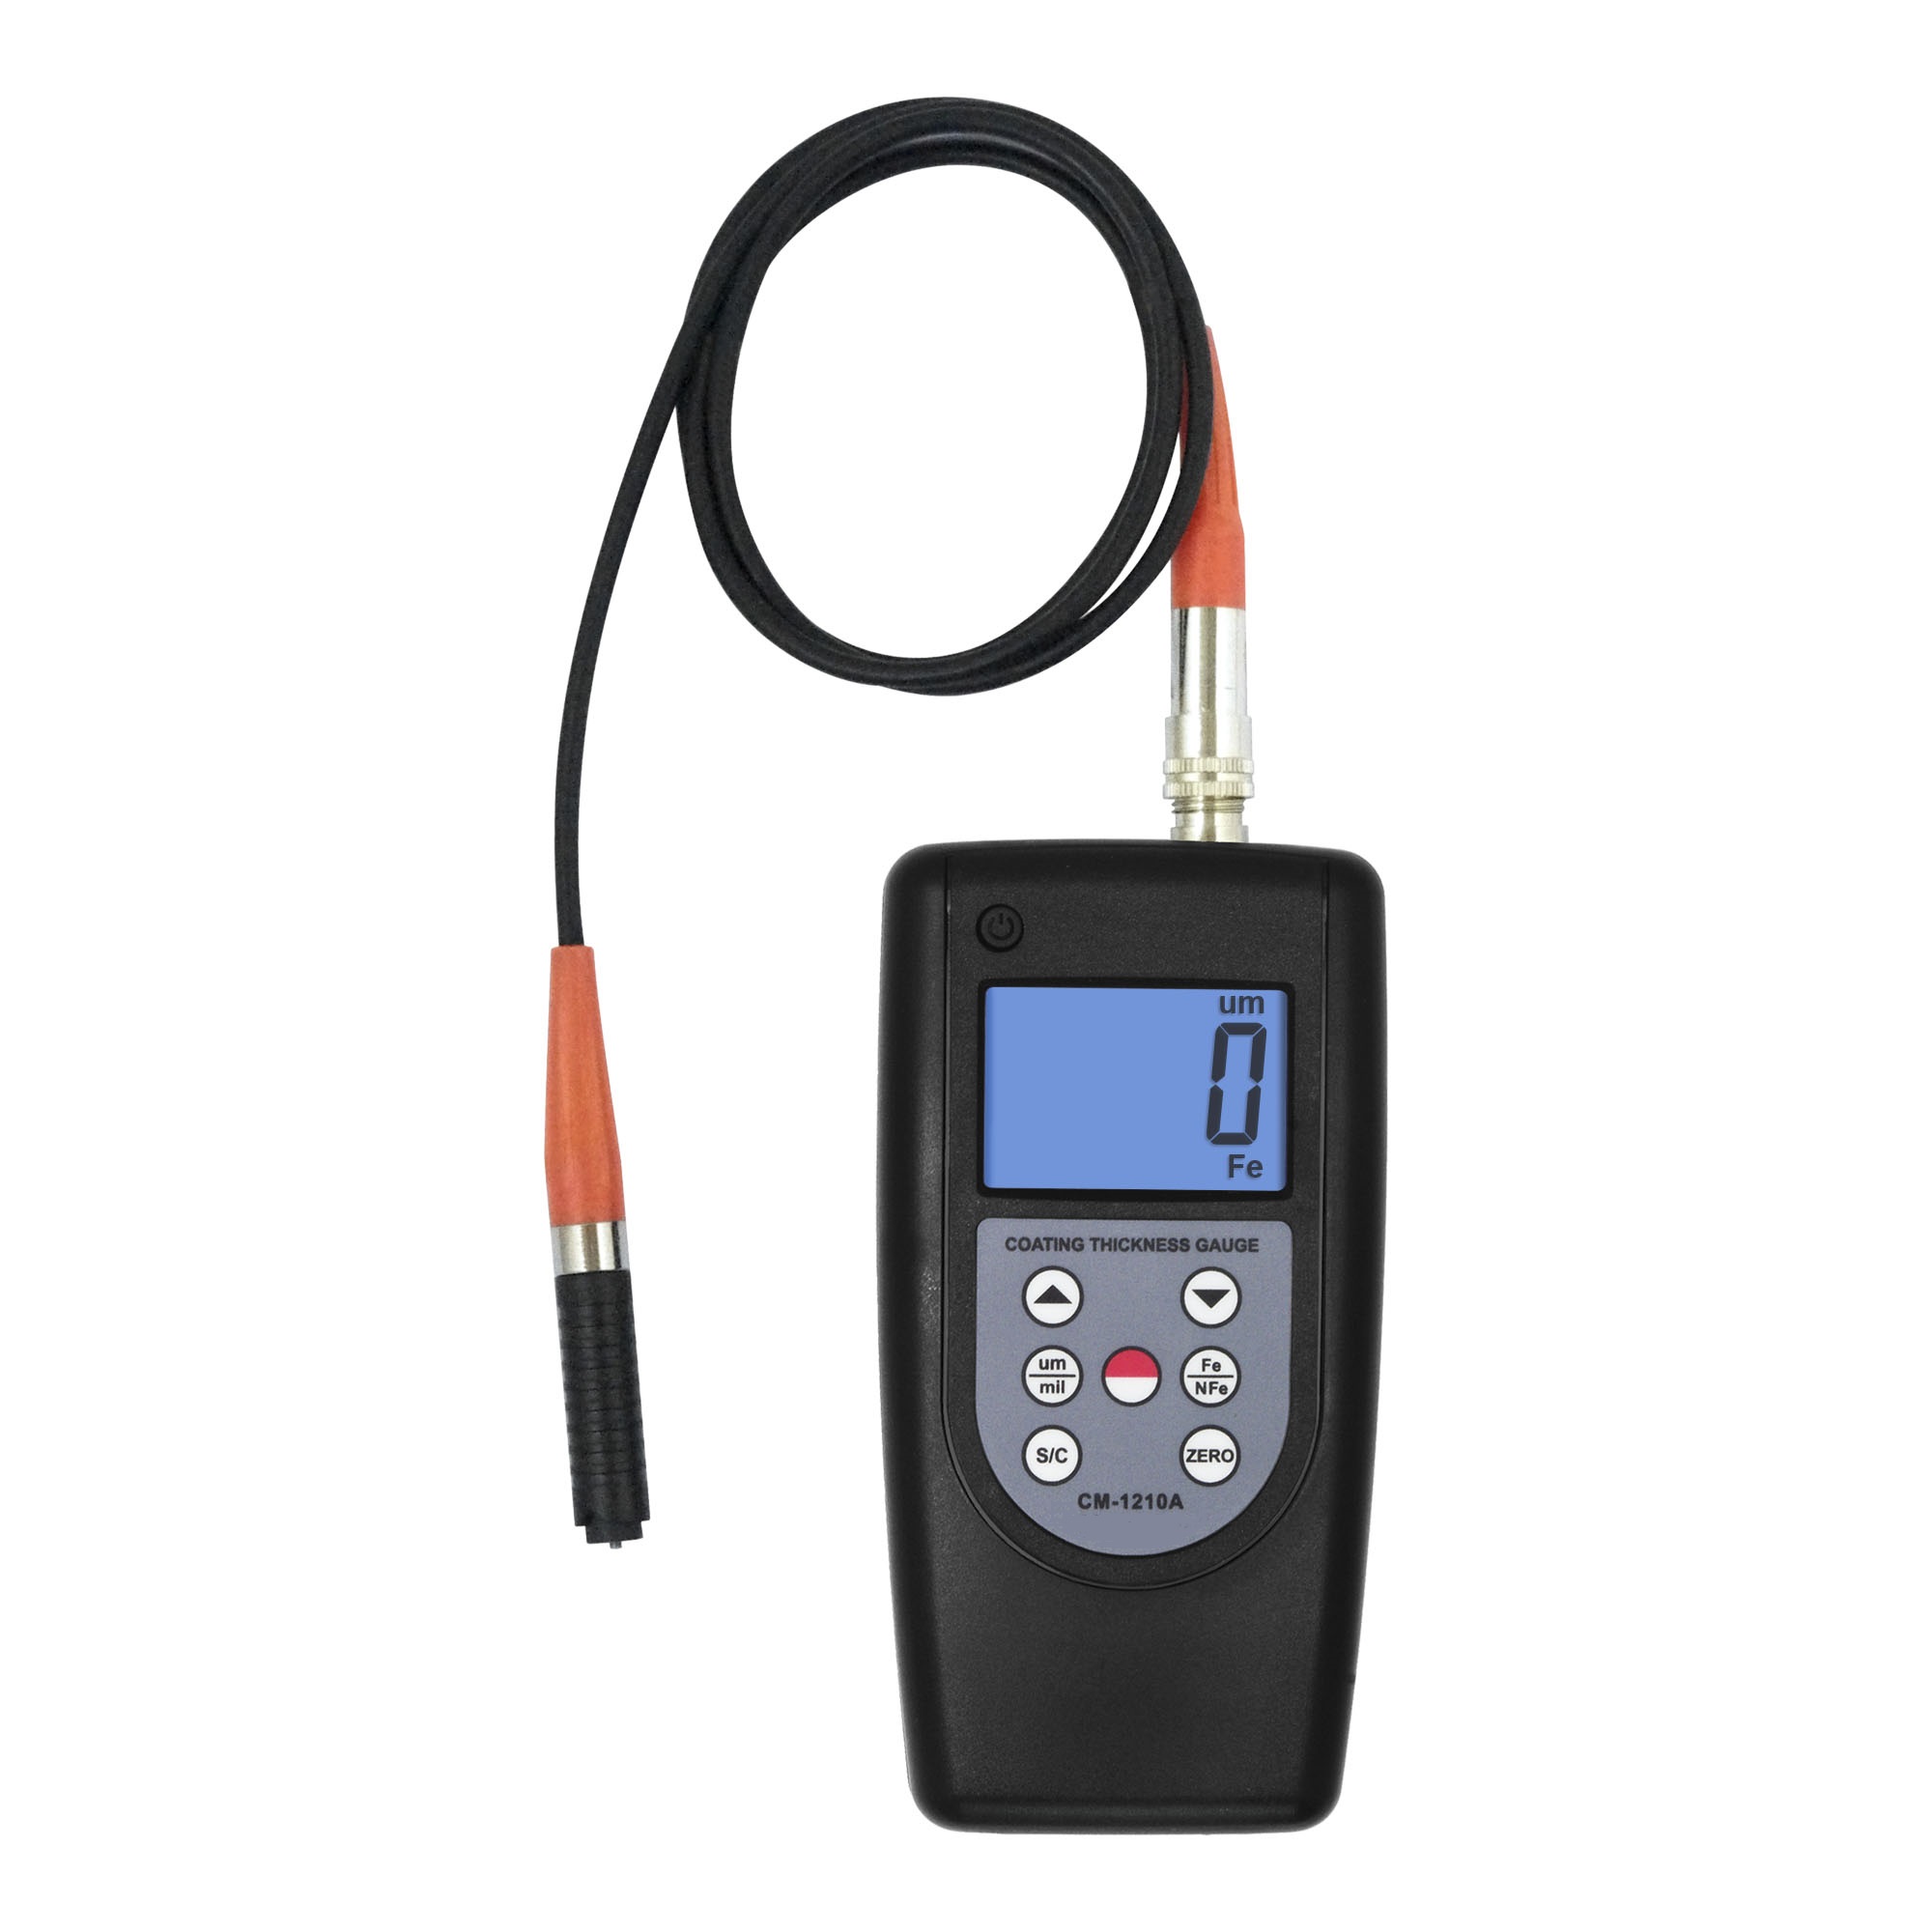 Coating Thickness Gauge CM1210FN-A(Basic)